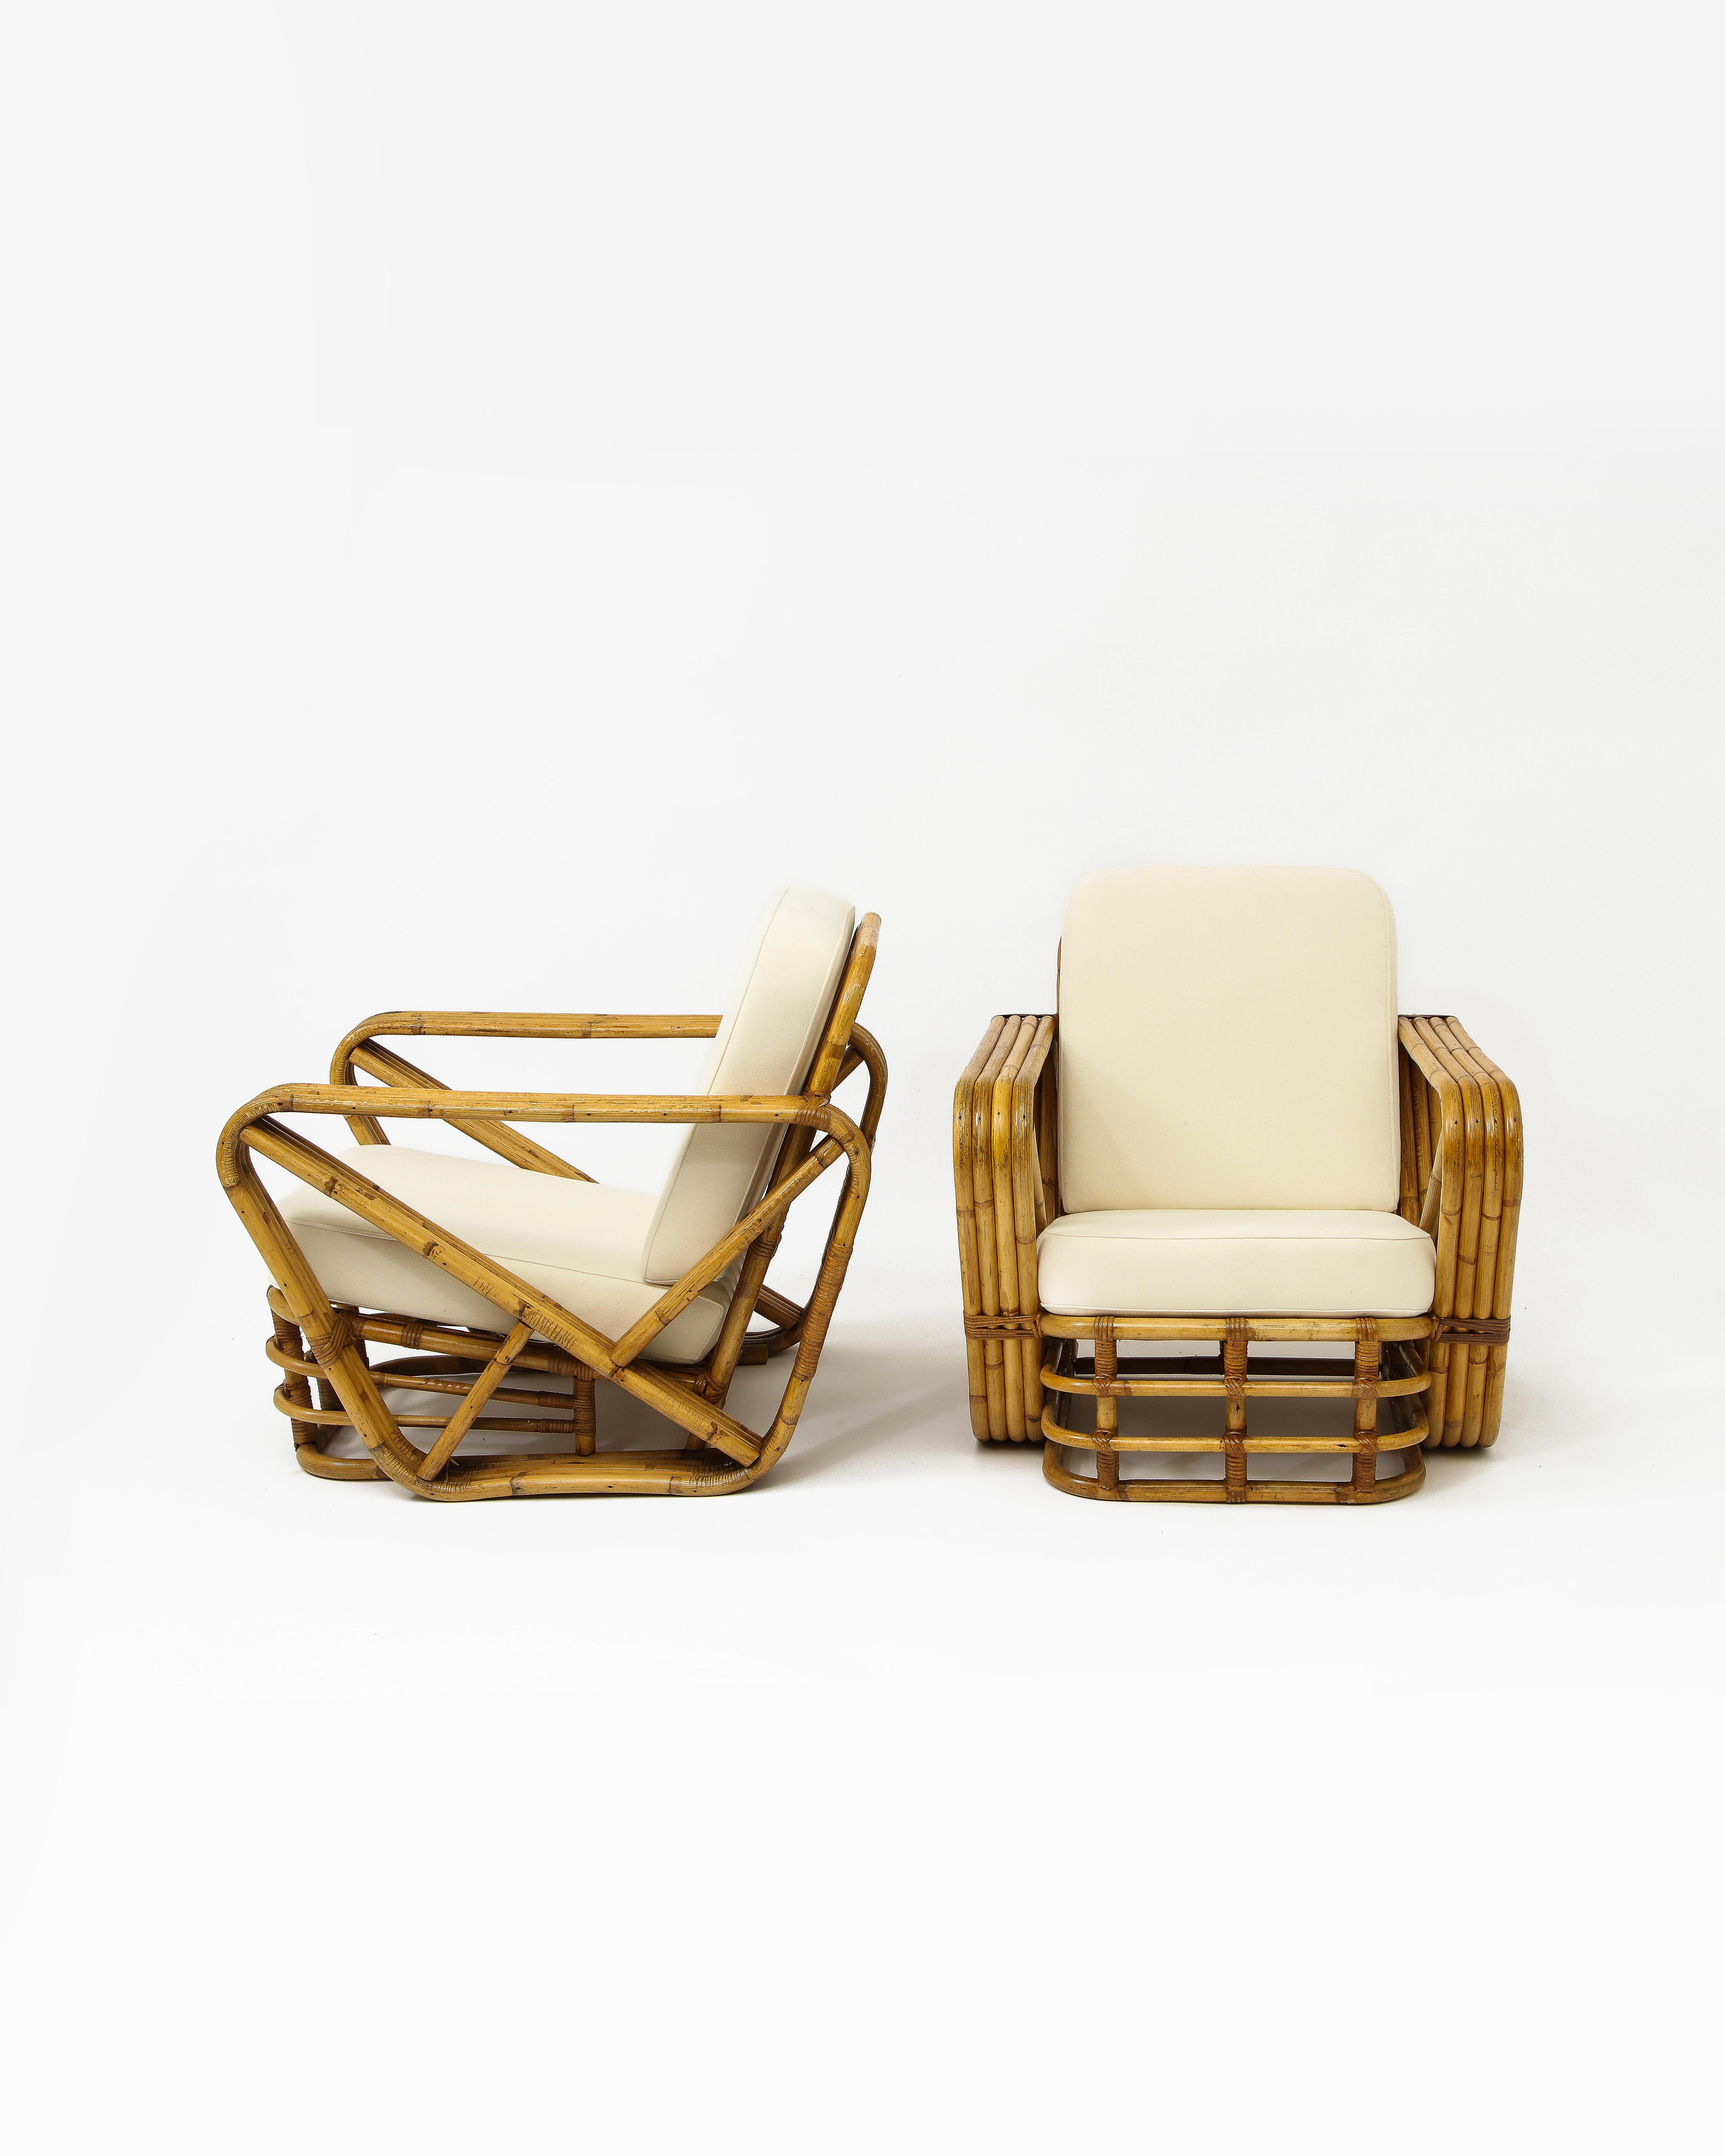 Four strand pretzel arm bamboo rattan lounge chairs with open base in the manner of Paul Frankl.

Arms are 4” wide. Arms slopping 21